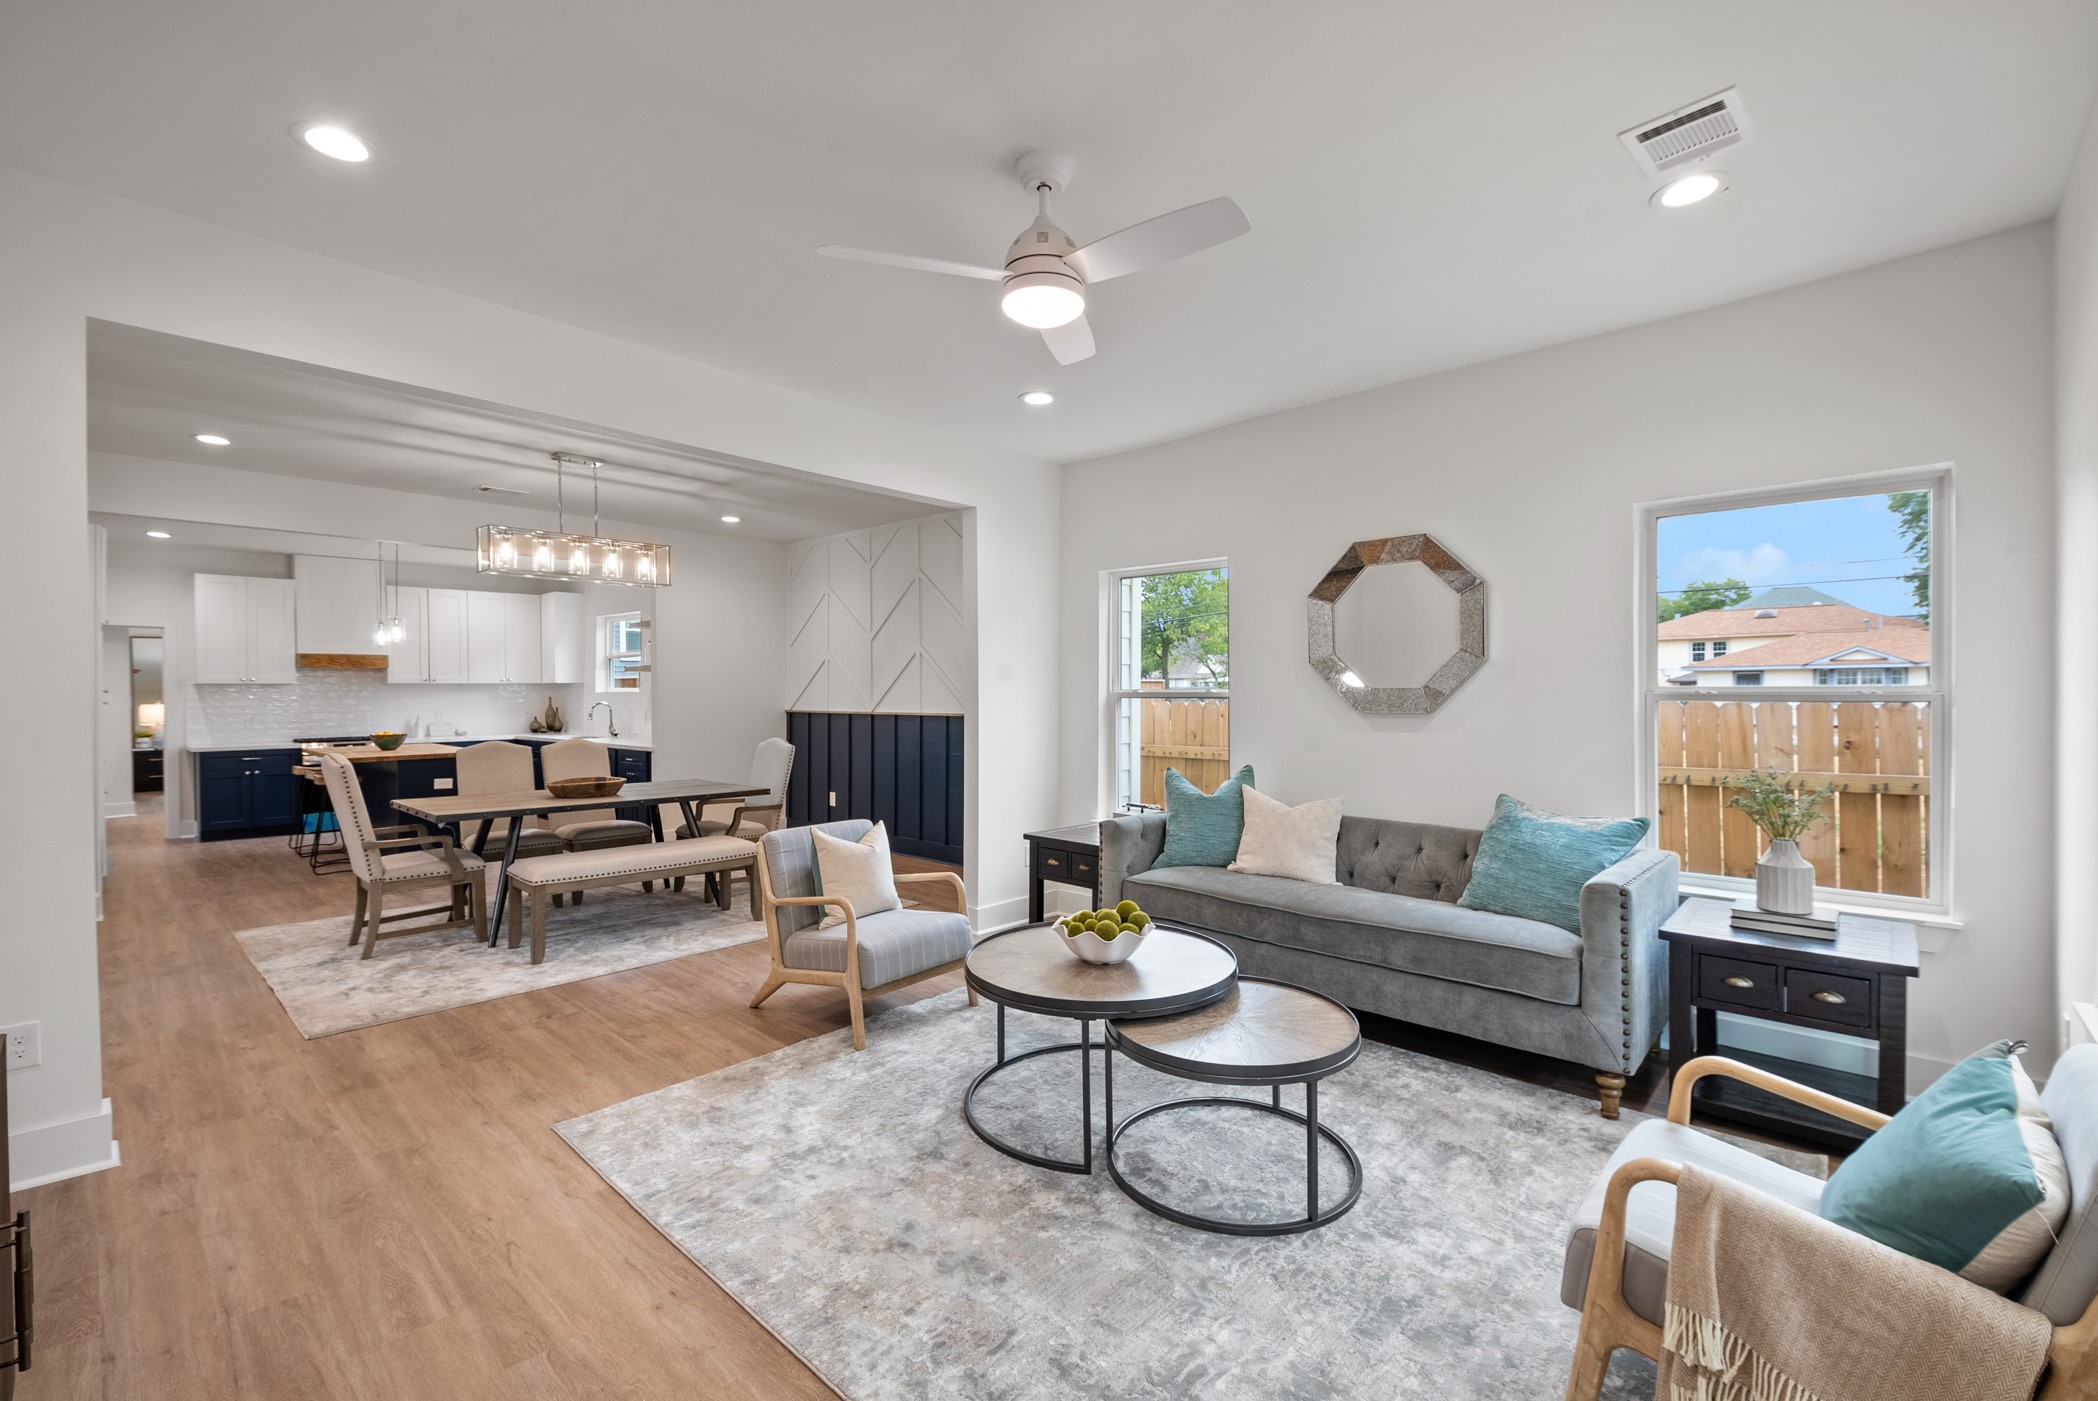 Absolutely loving the open concept living room, dining room and kitchen combo in this home! It's like hosting a party every day, with seamless flow and plenty of space for entertaining.